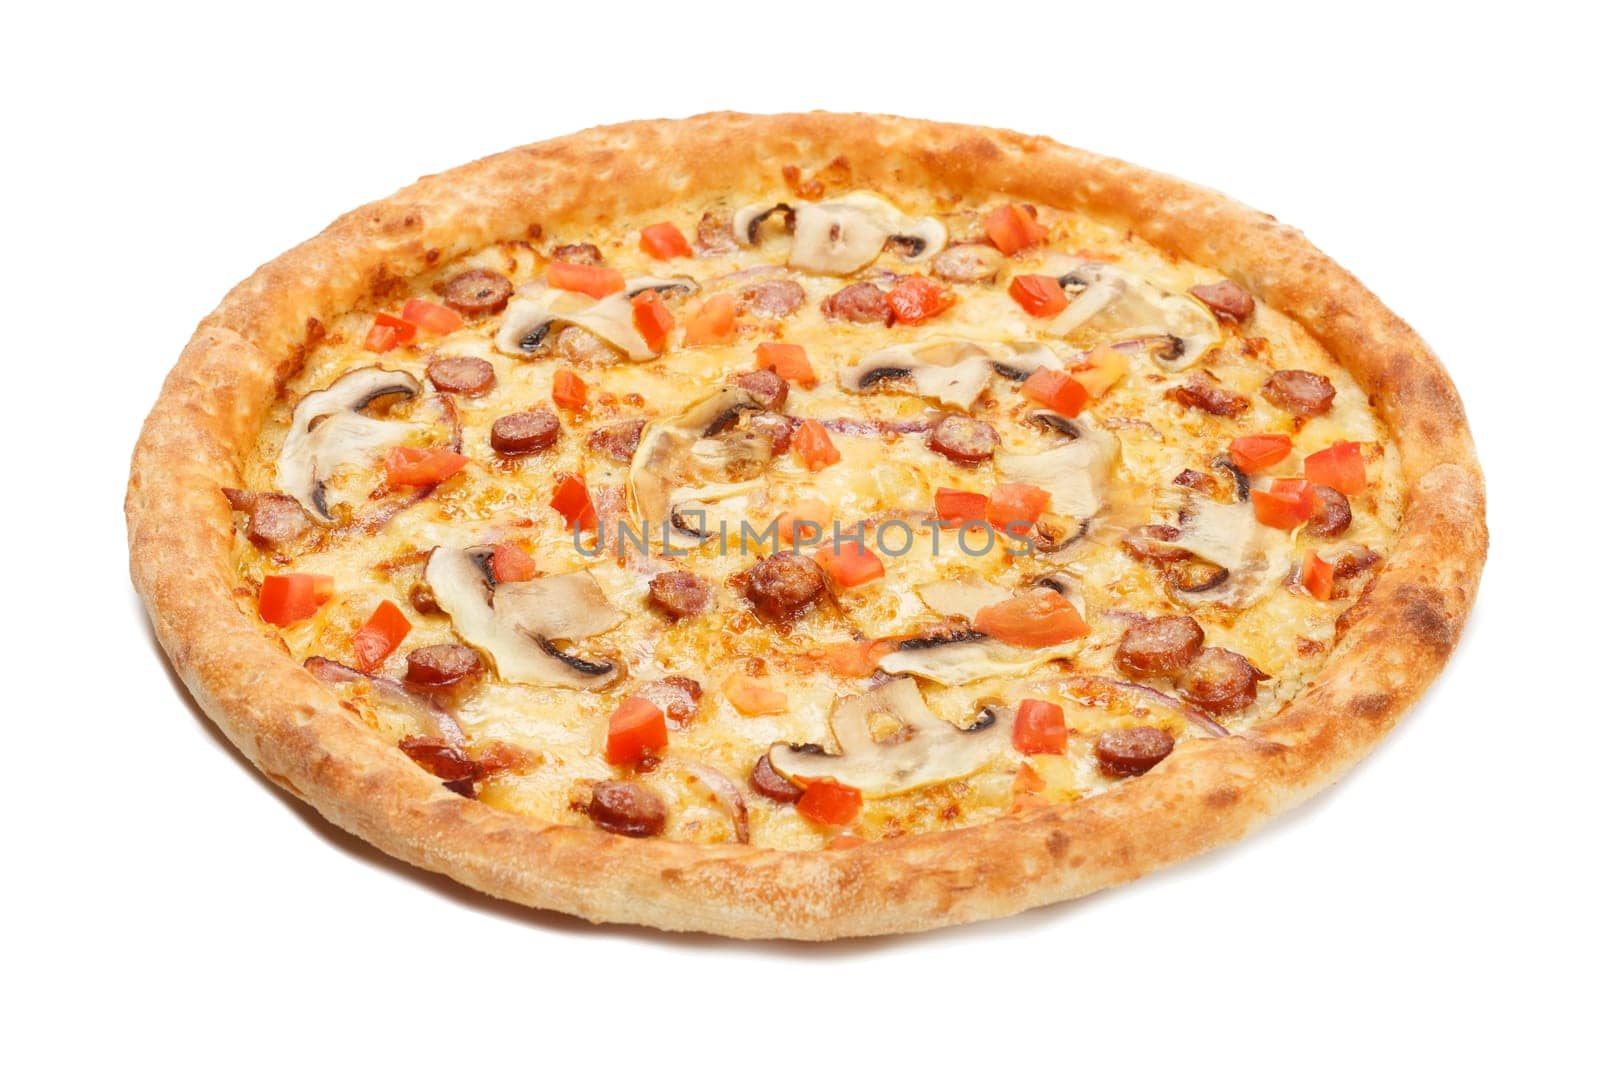 Delicious italian pizza with sausages, mushrooms, vegetables and cheeseisolated on white background.